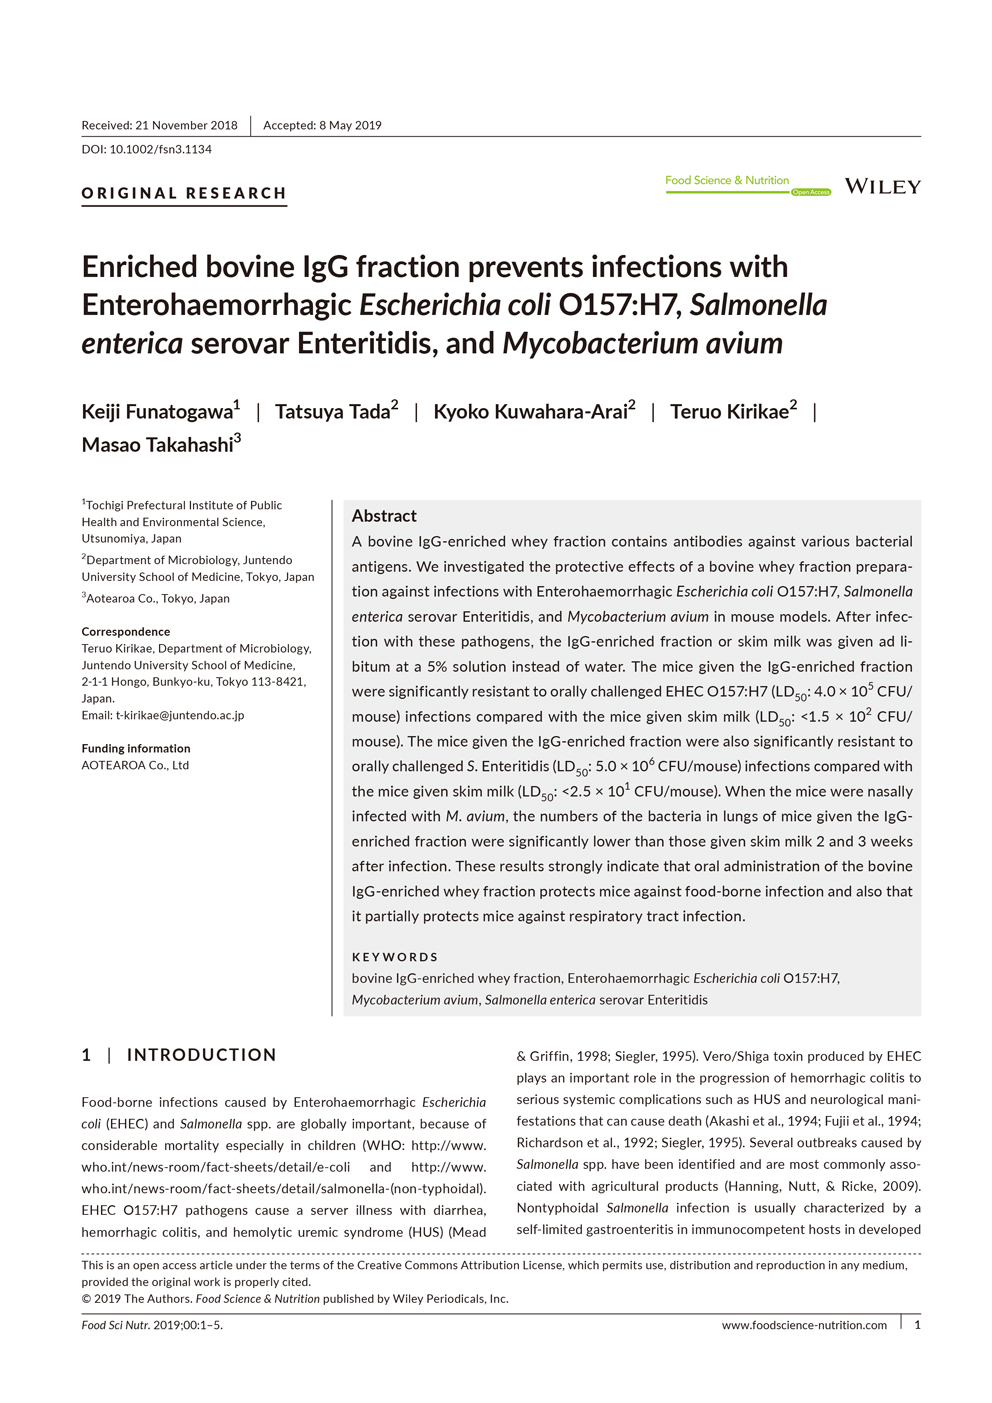 The effectiveness of bovine IgG fraction against salmonella, O-157 and non-tuberculous mycobacteria P1